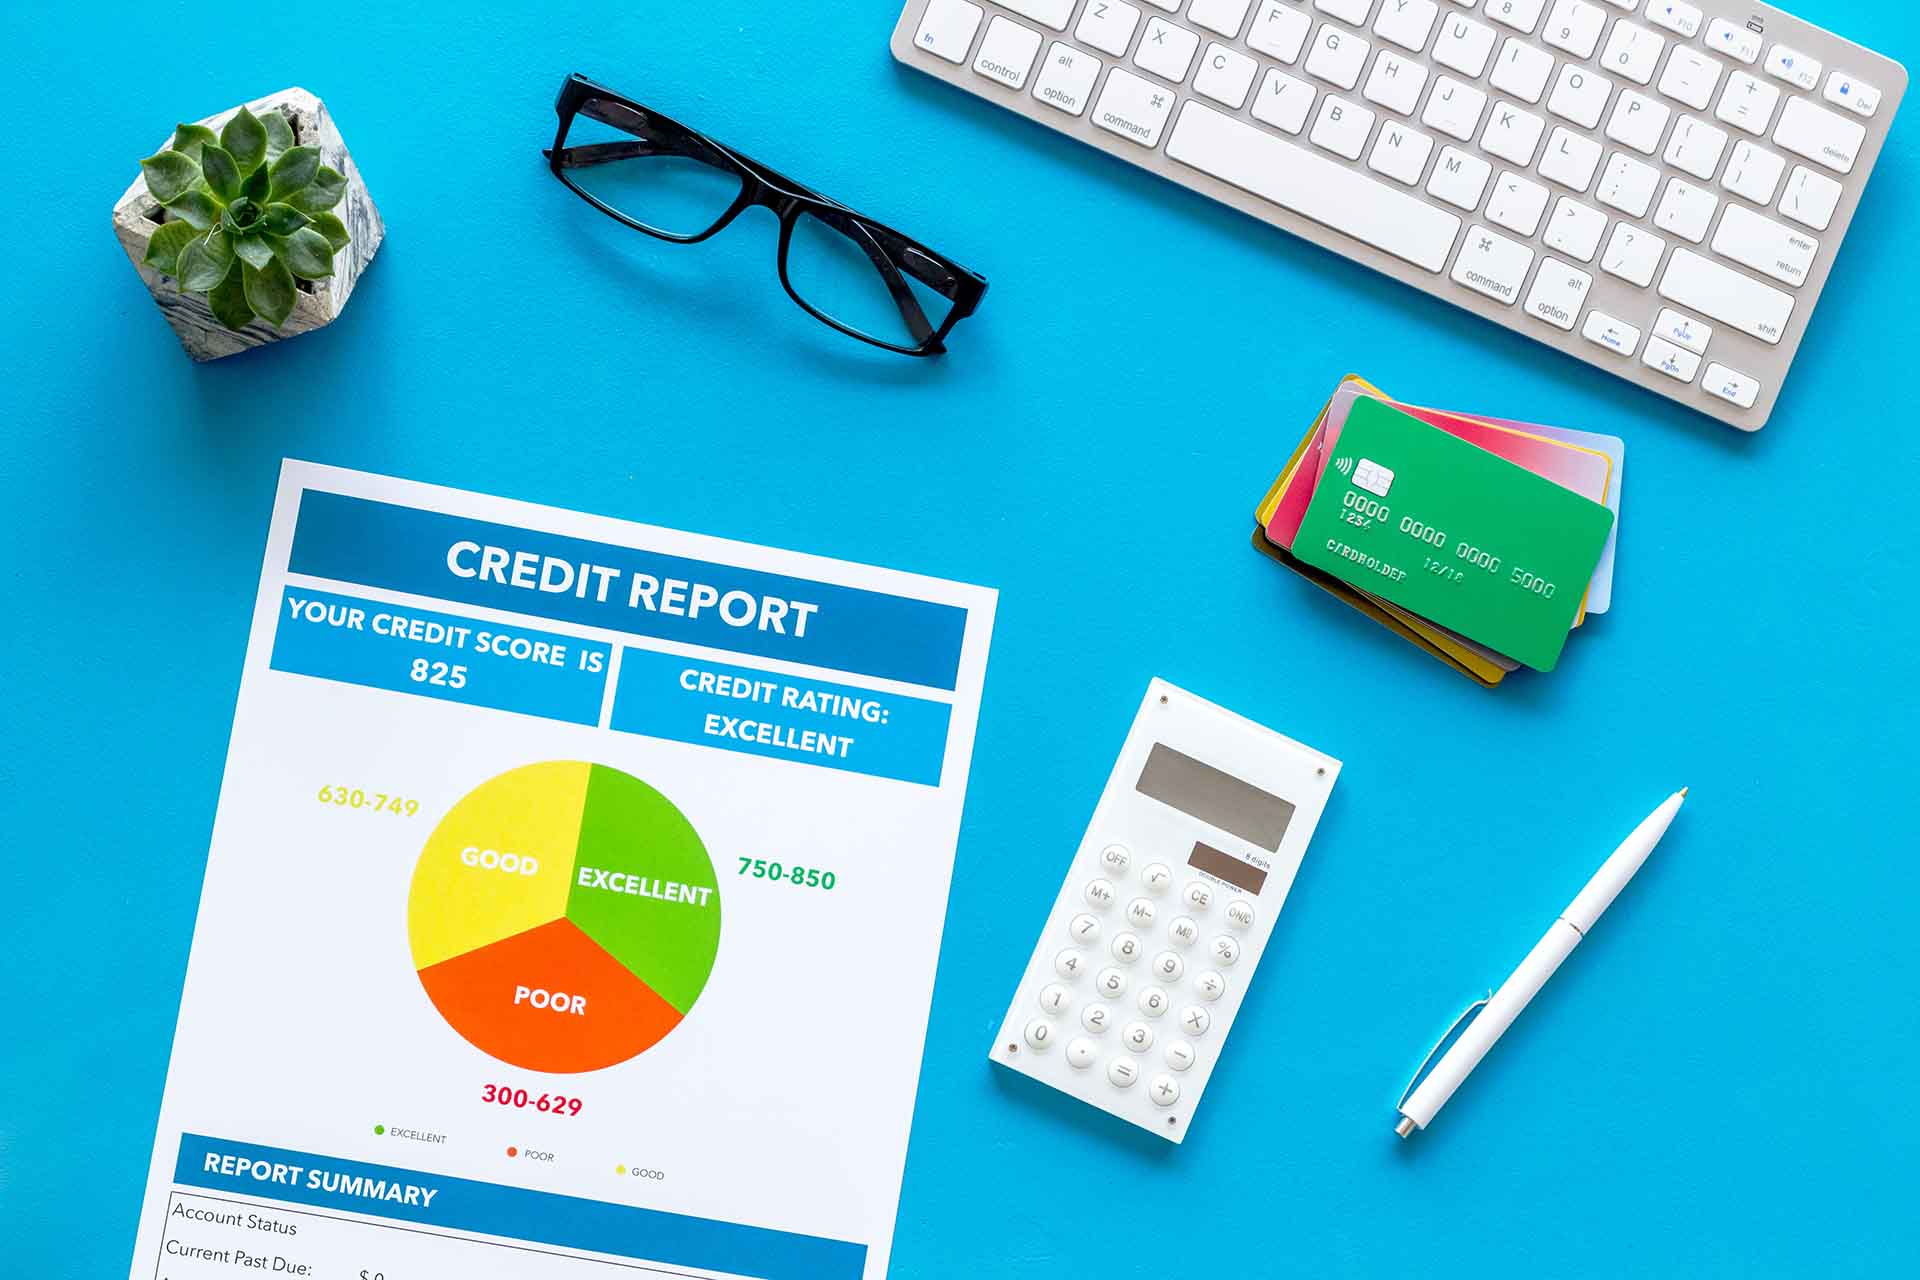 Does Your Income Affect Your Credit Score? (Answered)